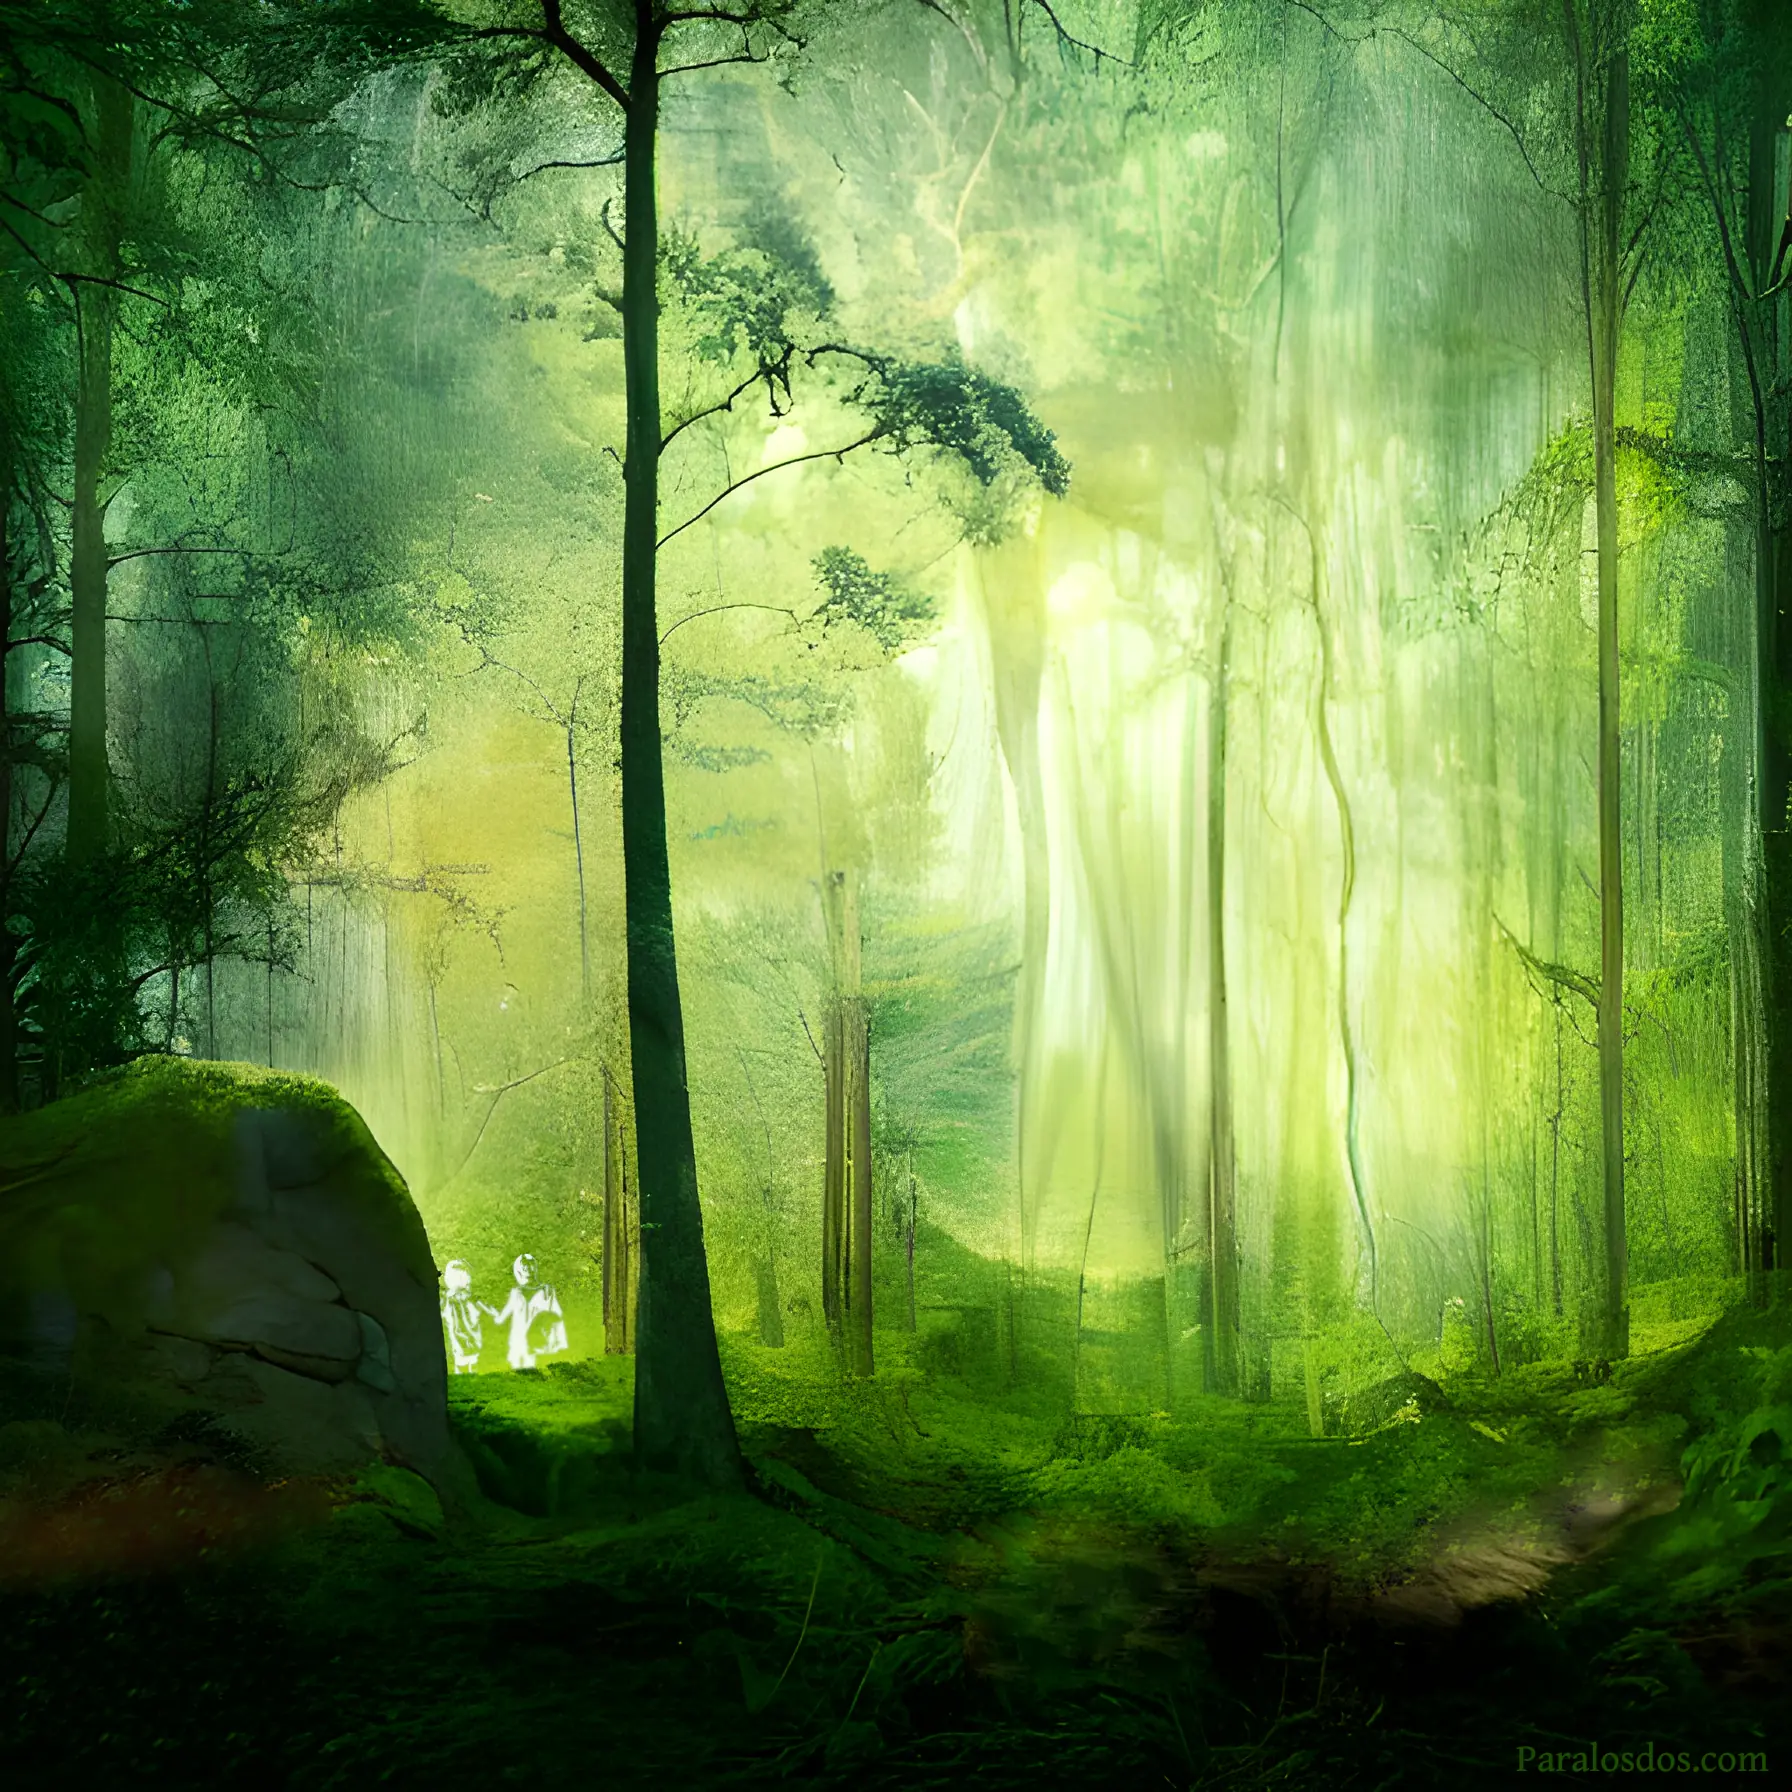 An artistic rendering of sunlight reaching into a jungle.